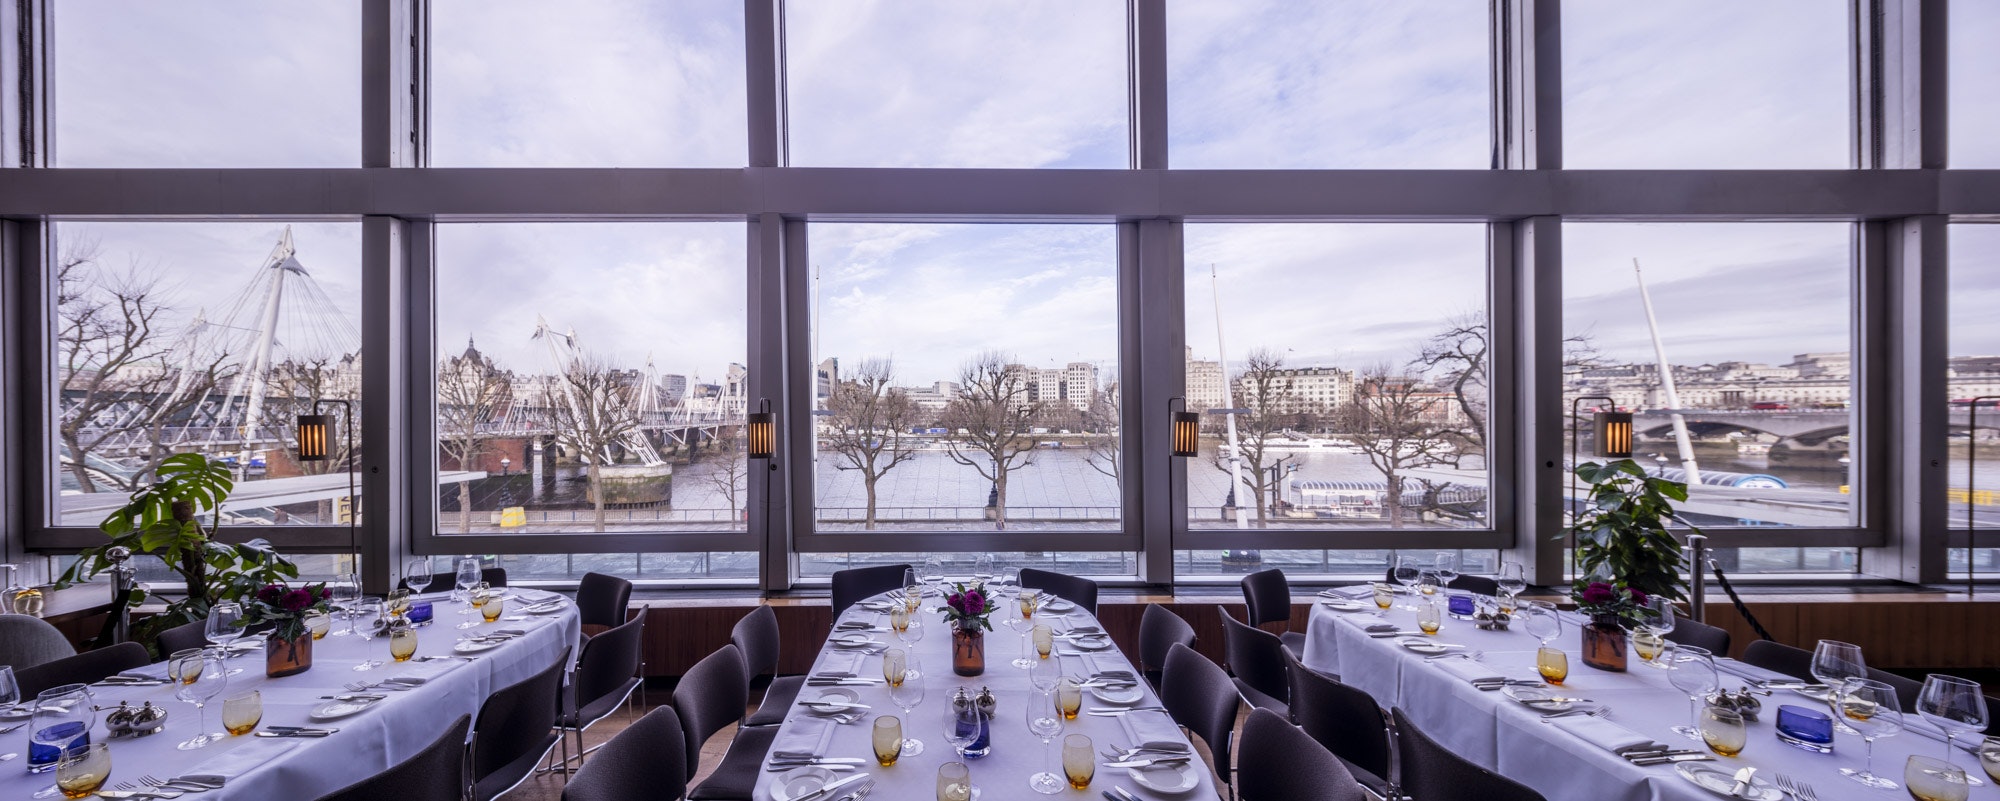 Private Dining Rooms With A View Venues in London - Skylon